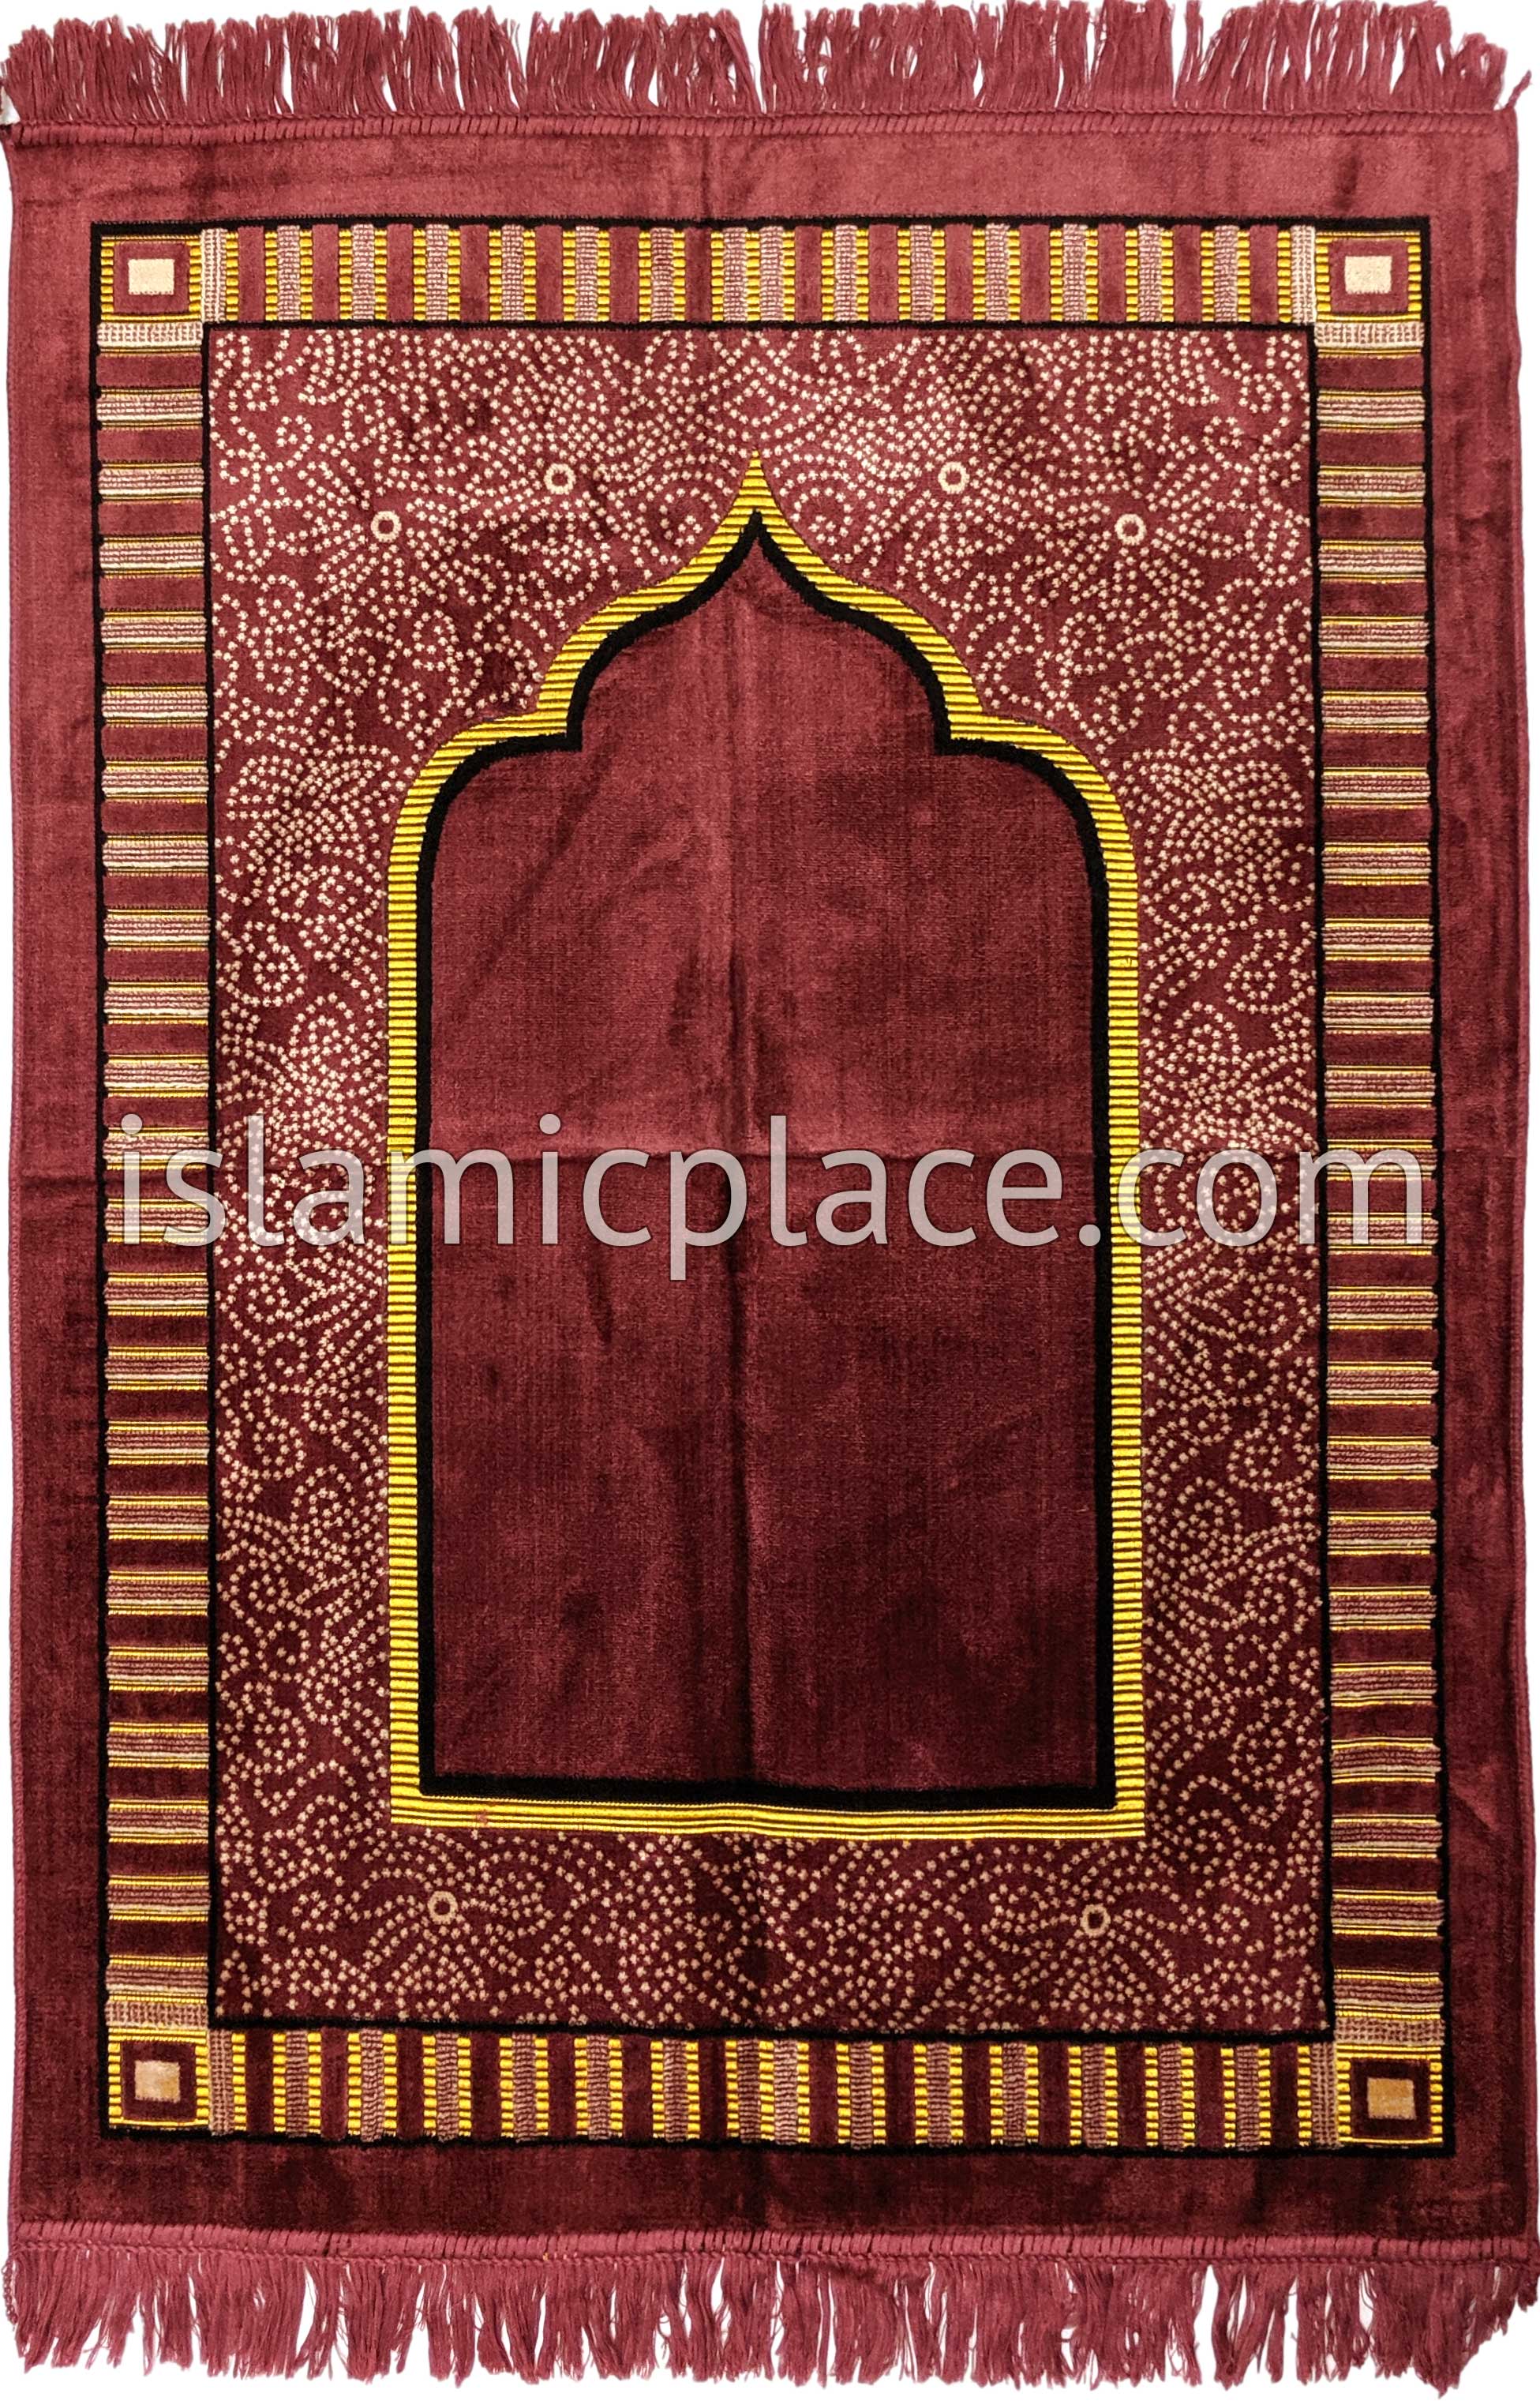 Dusty Rose, Gold and Black Simple Mihrab Prayer Rug (Big & Tall size)